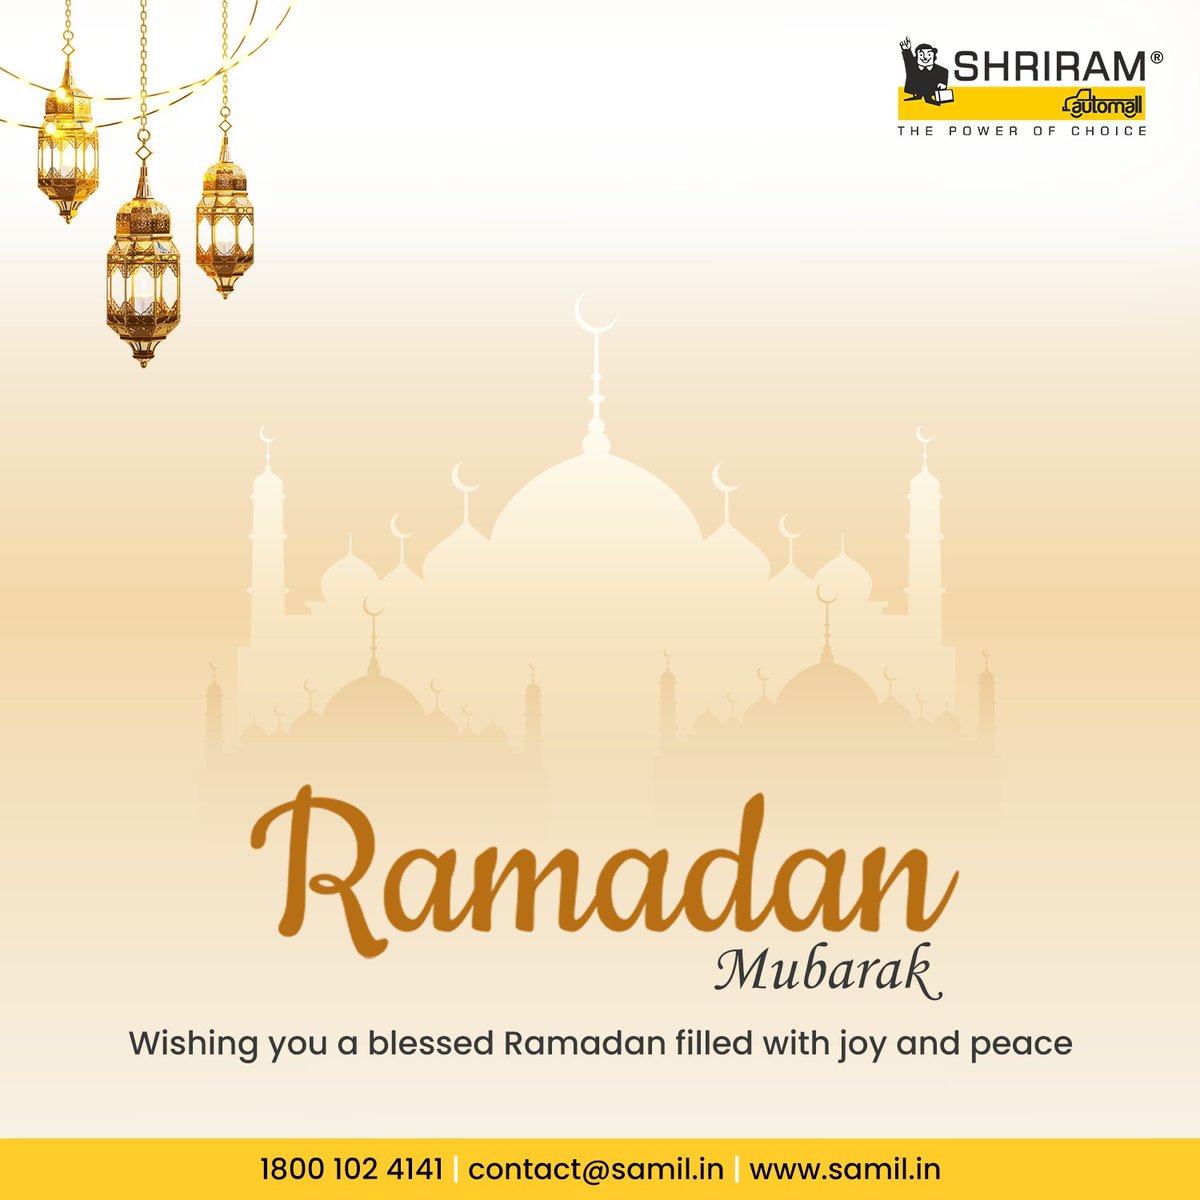 Wishing you a Ramadan filled with abundant blessings, joy, and peace. May this sacred month bring you closer to your loved ones and deepen your connection with faith. Ramadan Mubarak! 

#RamadanMubarak #Blessings #PeaceAndJoy #UsedVehicles #UsedEquipment #PhysicalAuction #Samil